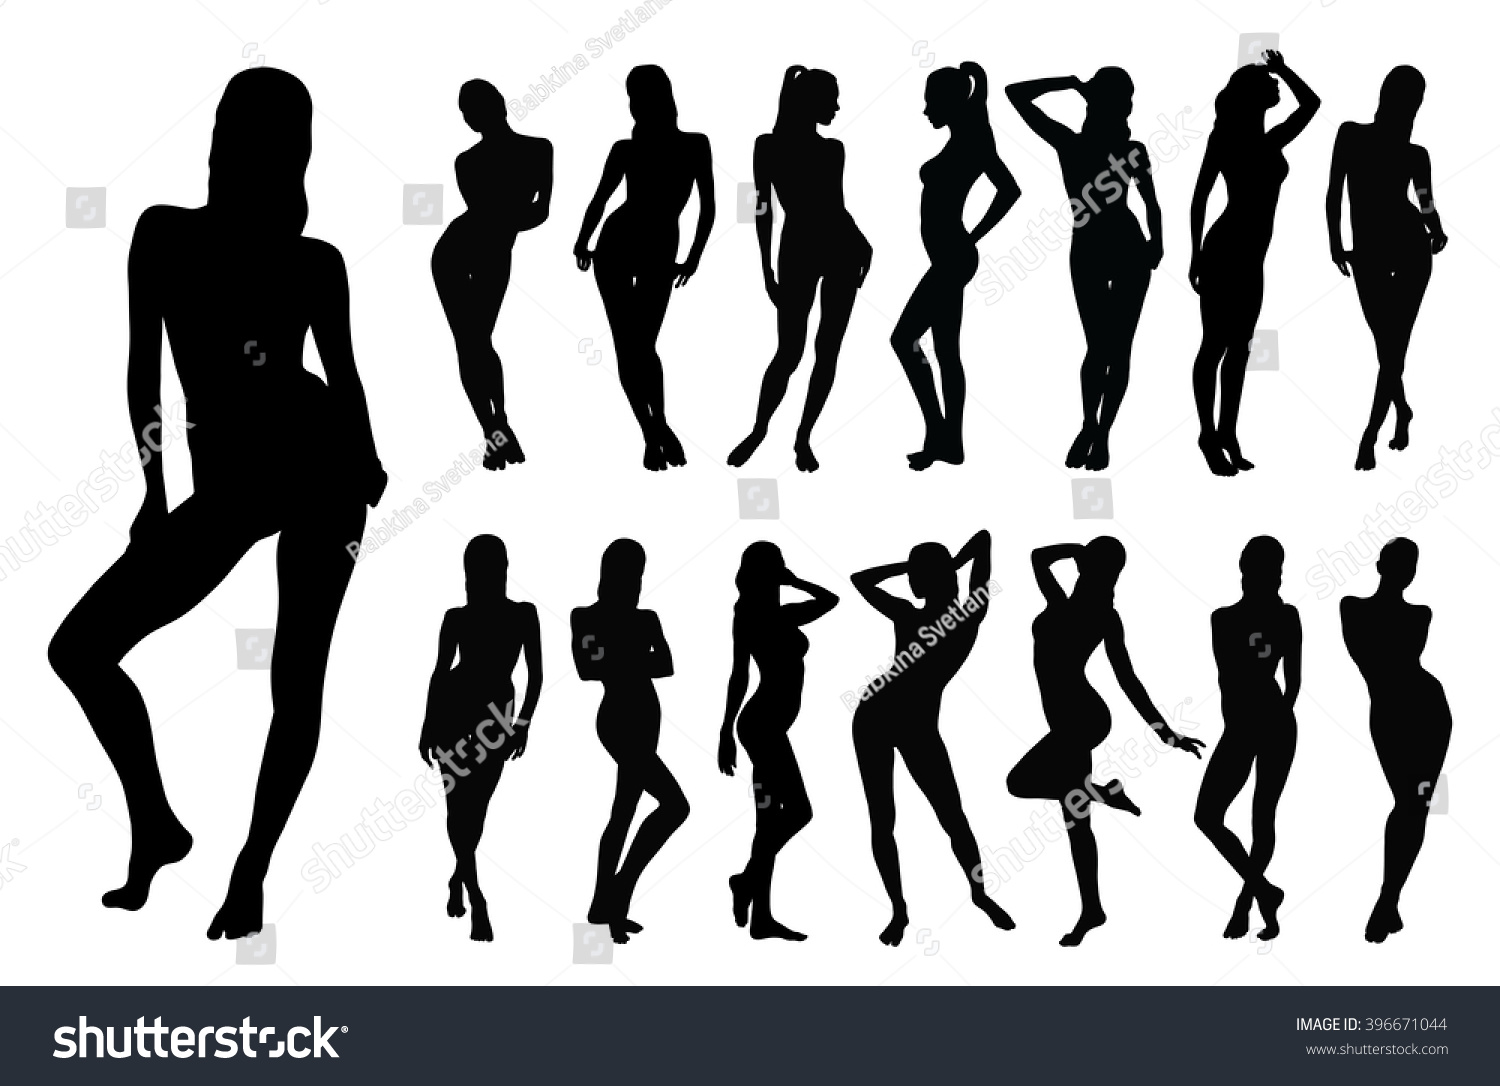 21,899 Hot girls icons Images, Stock Photos & Vectors | Shutterstock